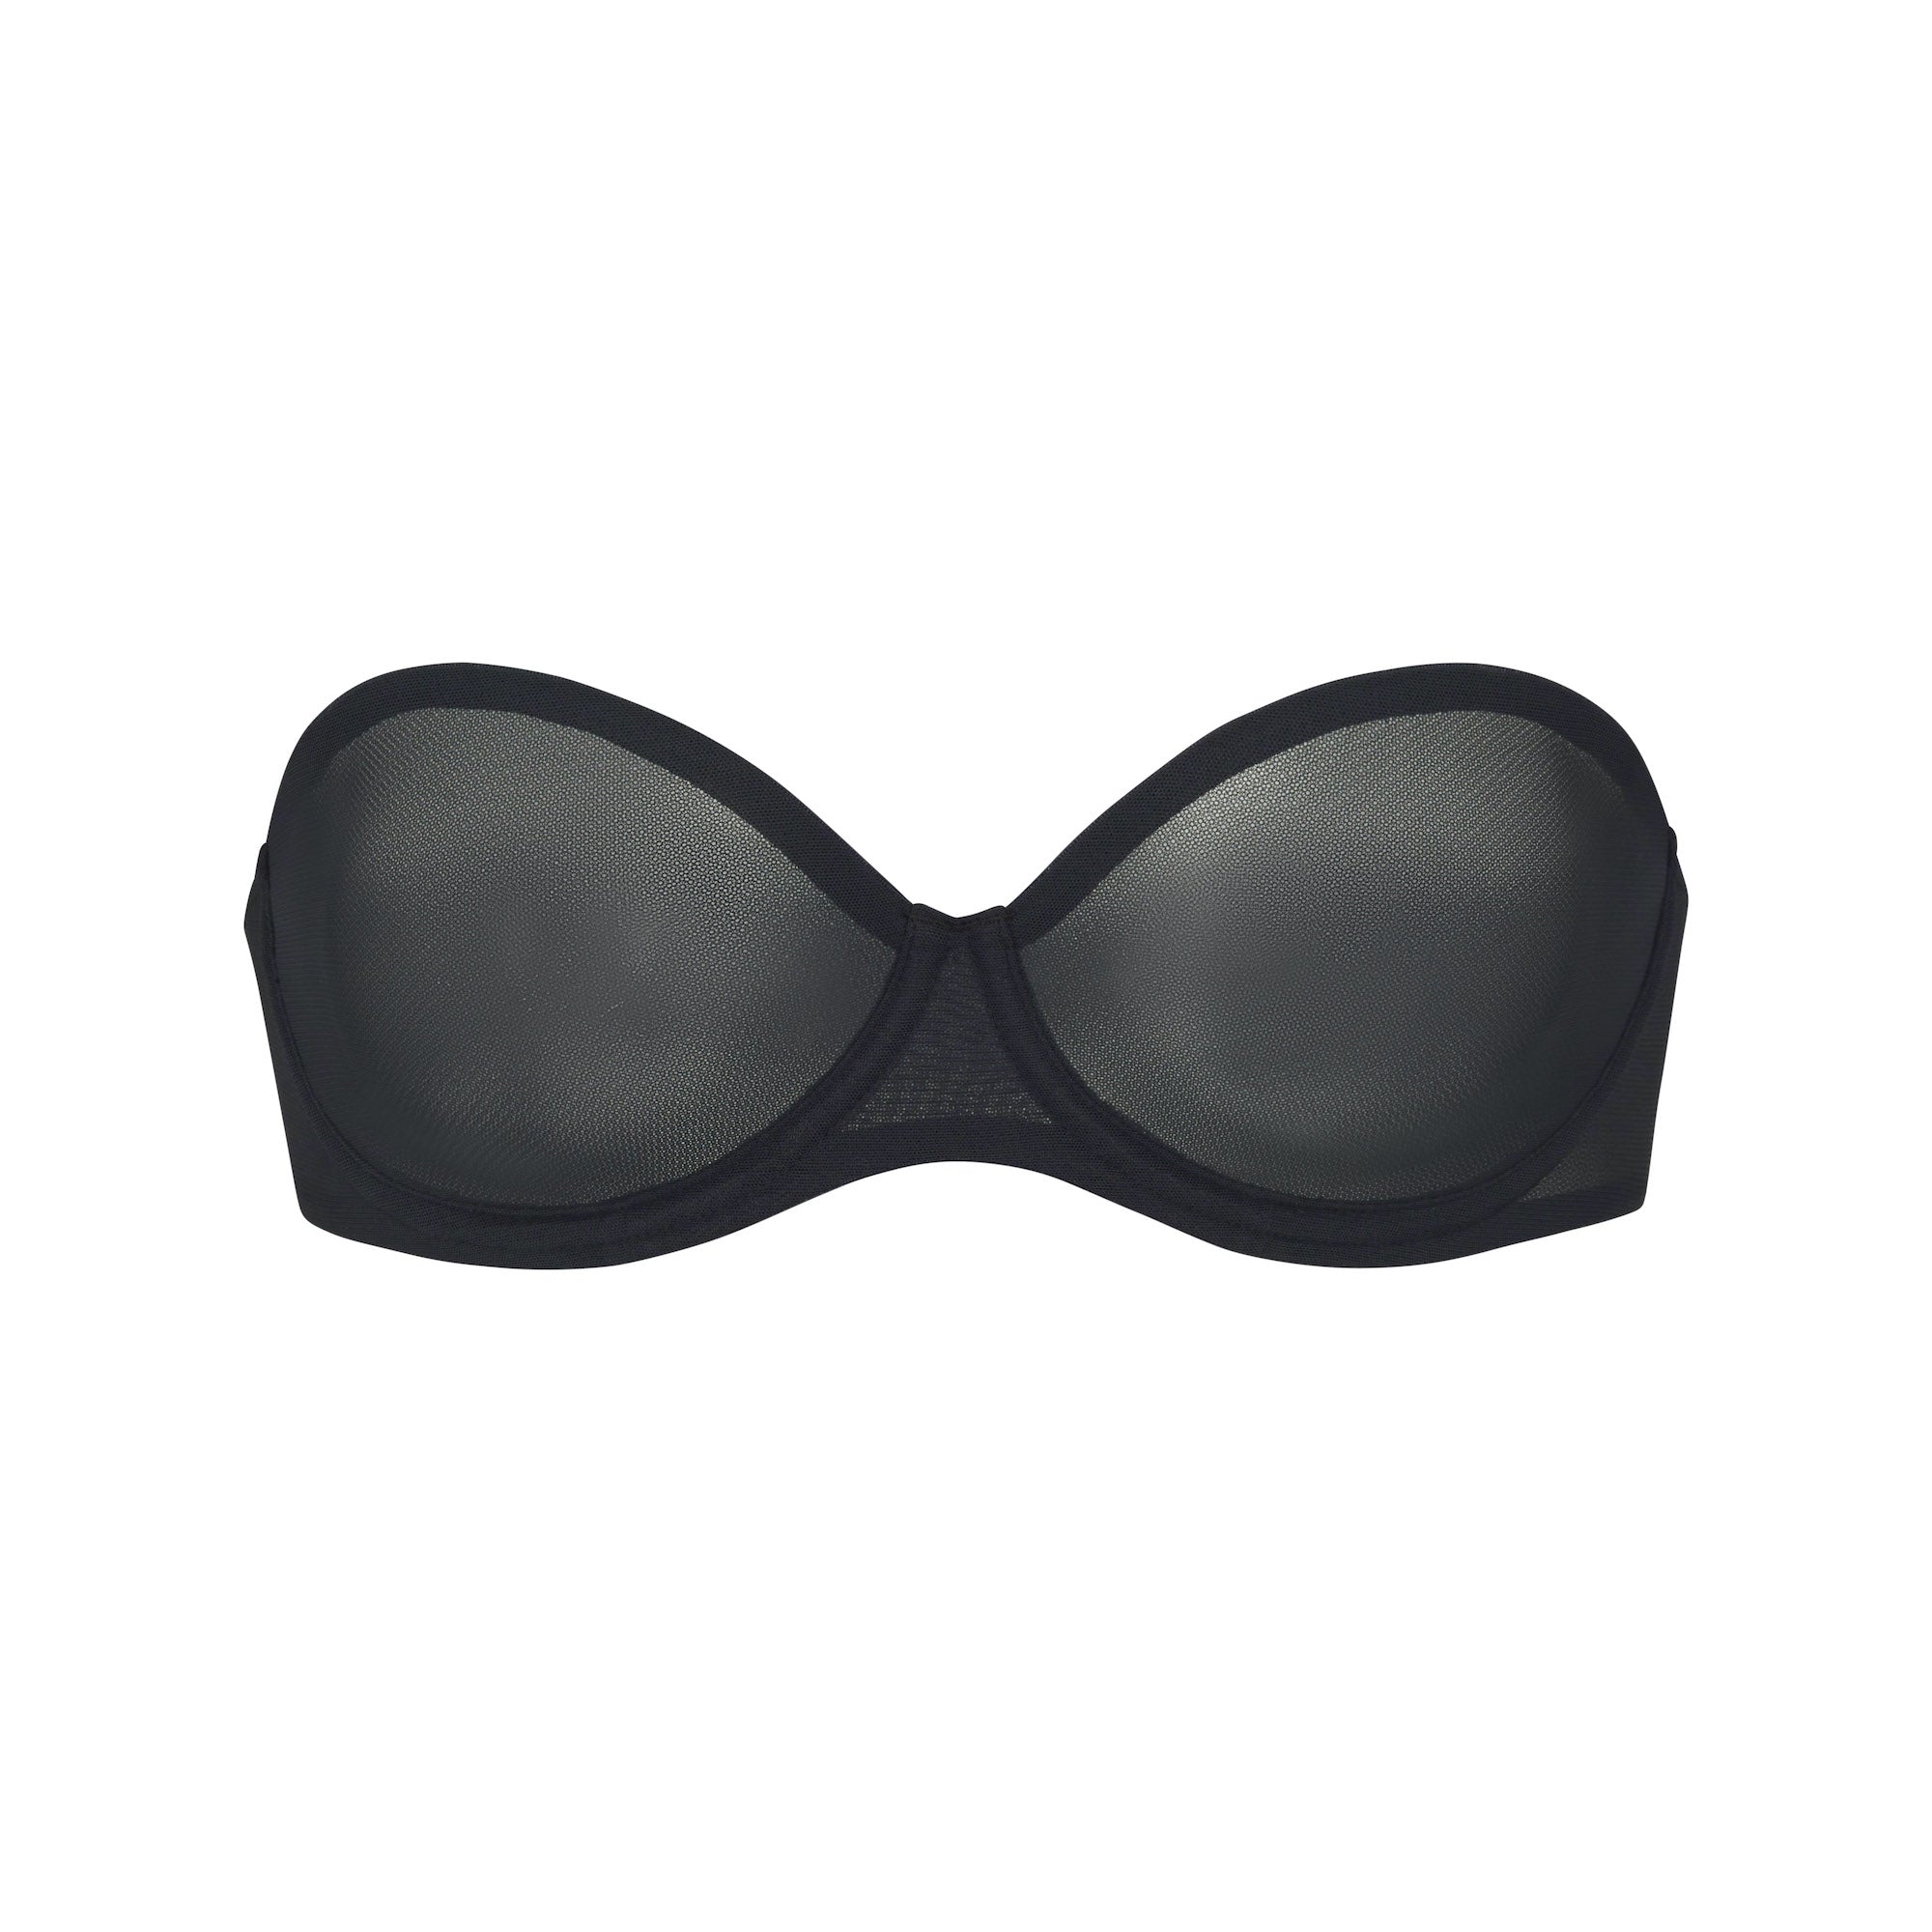 SKIMS NWT Onyx Black 40DDDD 40G Ultra Fine Mesh Strapless Bra Sheer  Underwire Size undefined - $25 New With Tags - From Cassandra